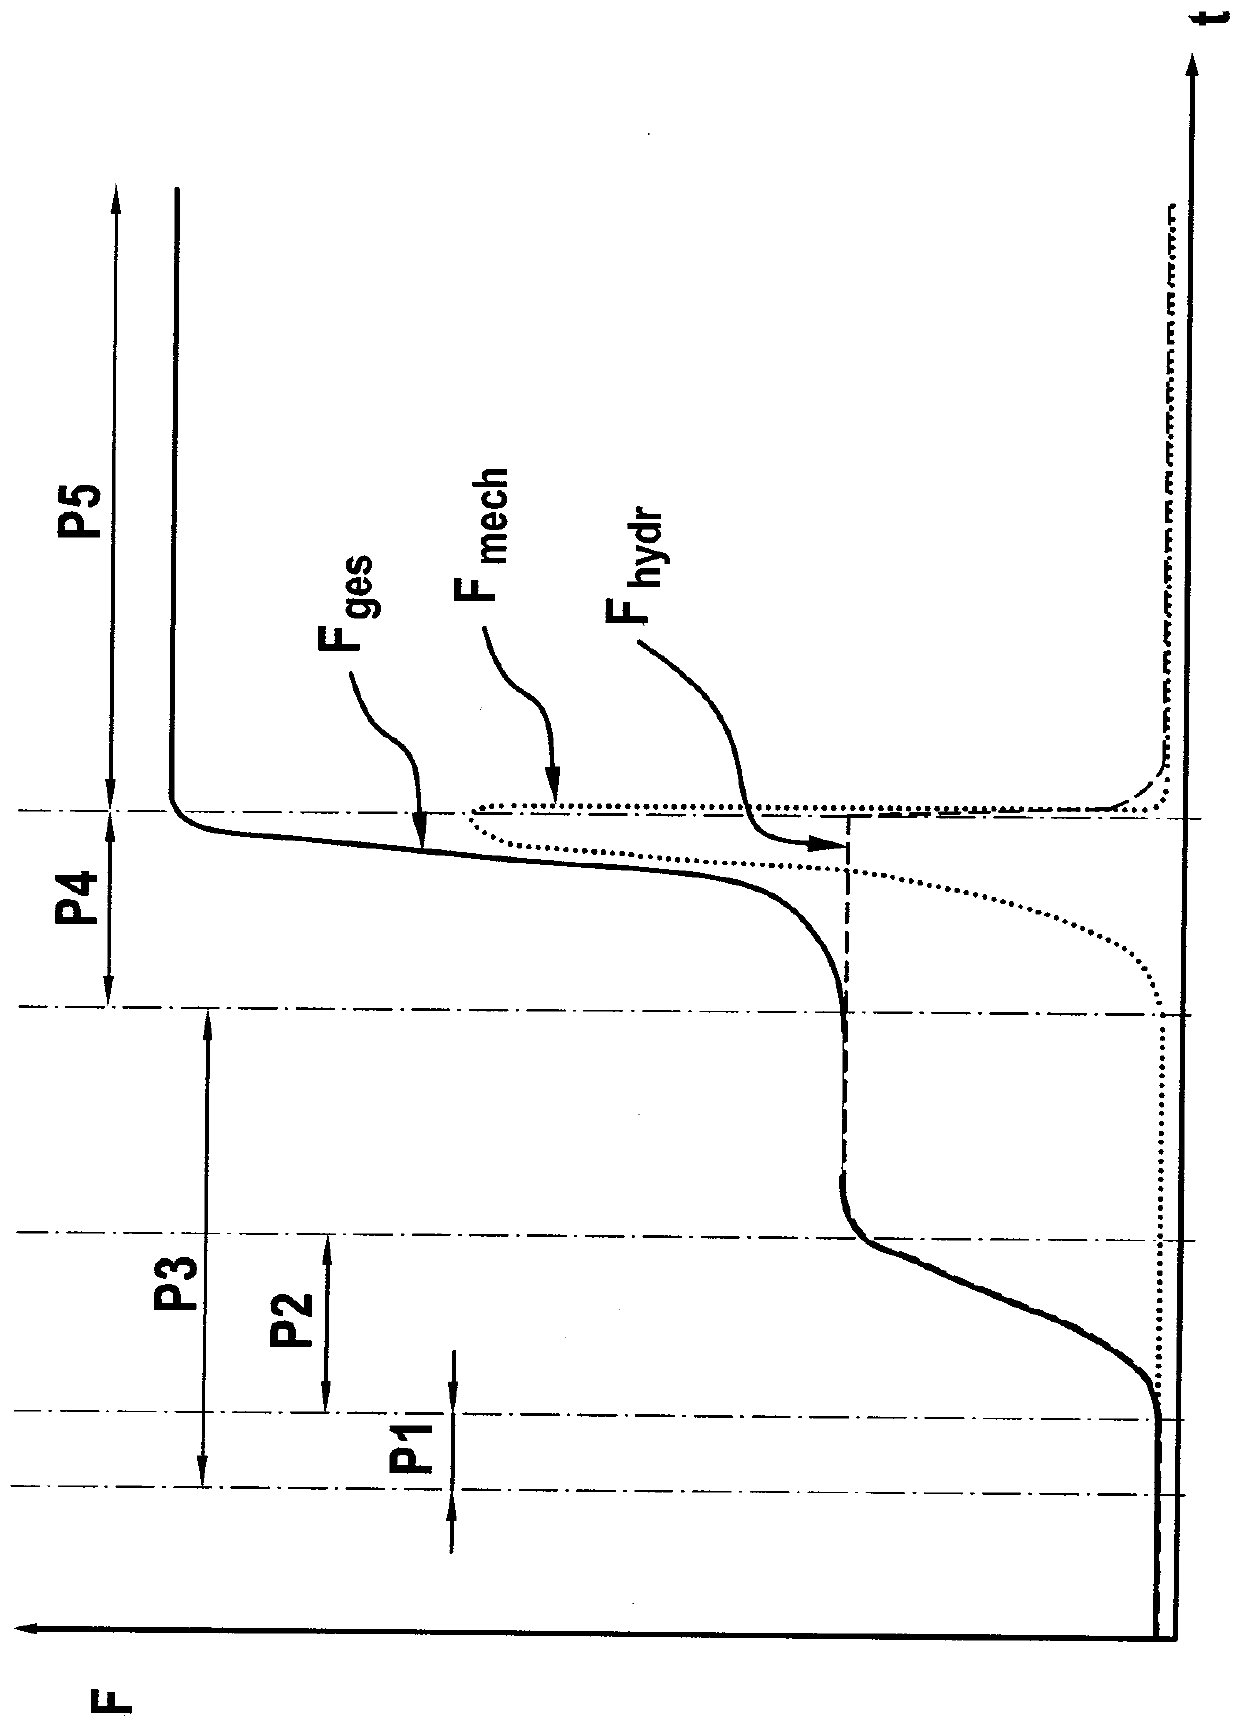 Method for Operating Automated Parking Brake